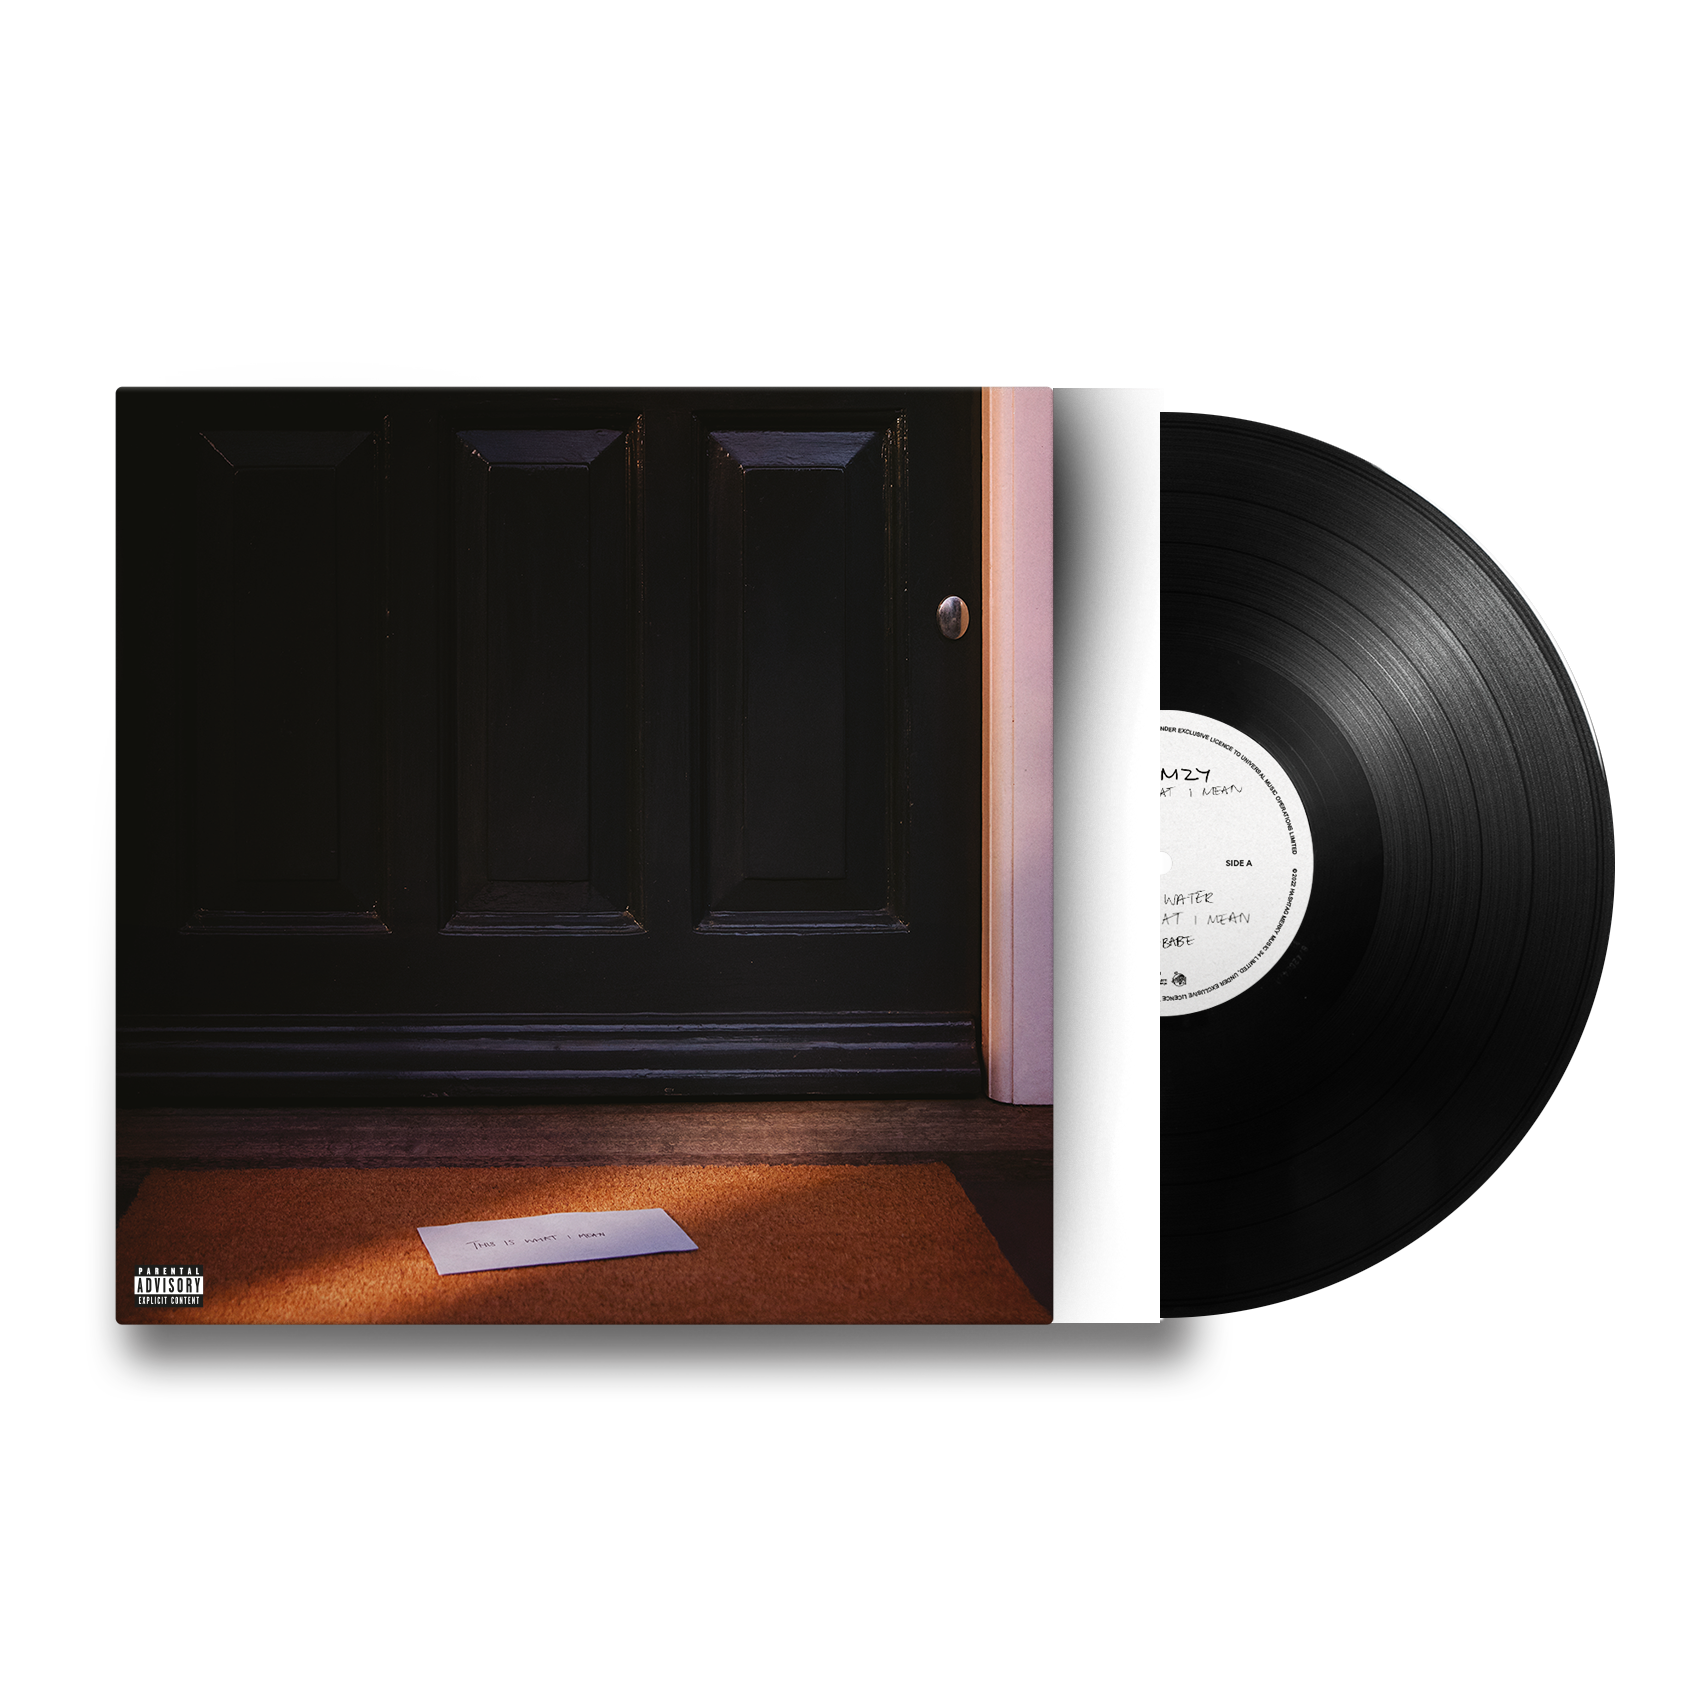 Stormzy - This Is What I Mean: Vinyl 2LP